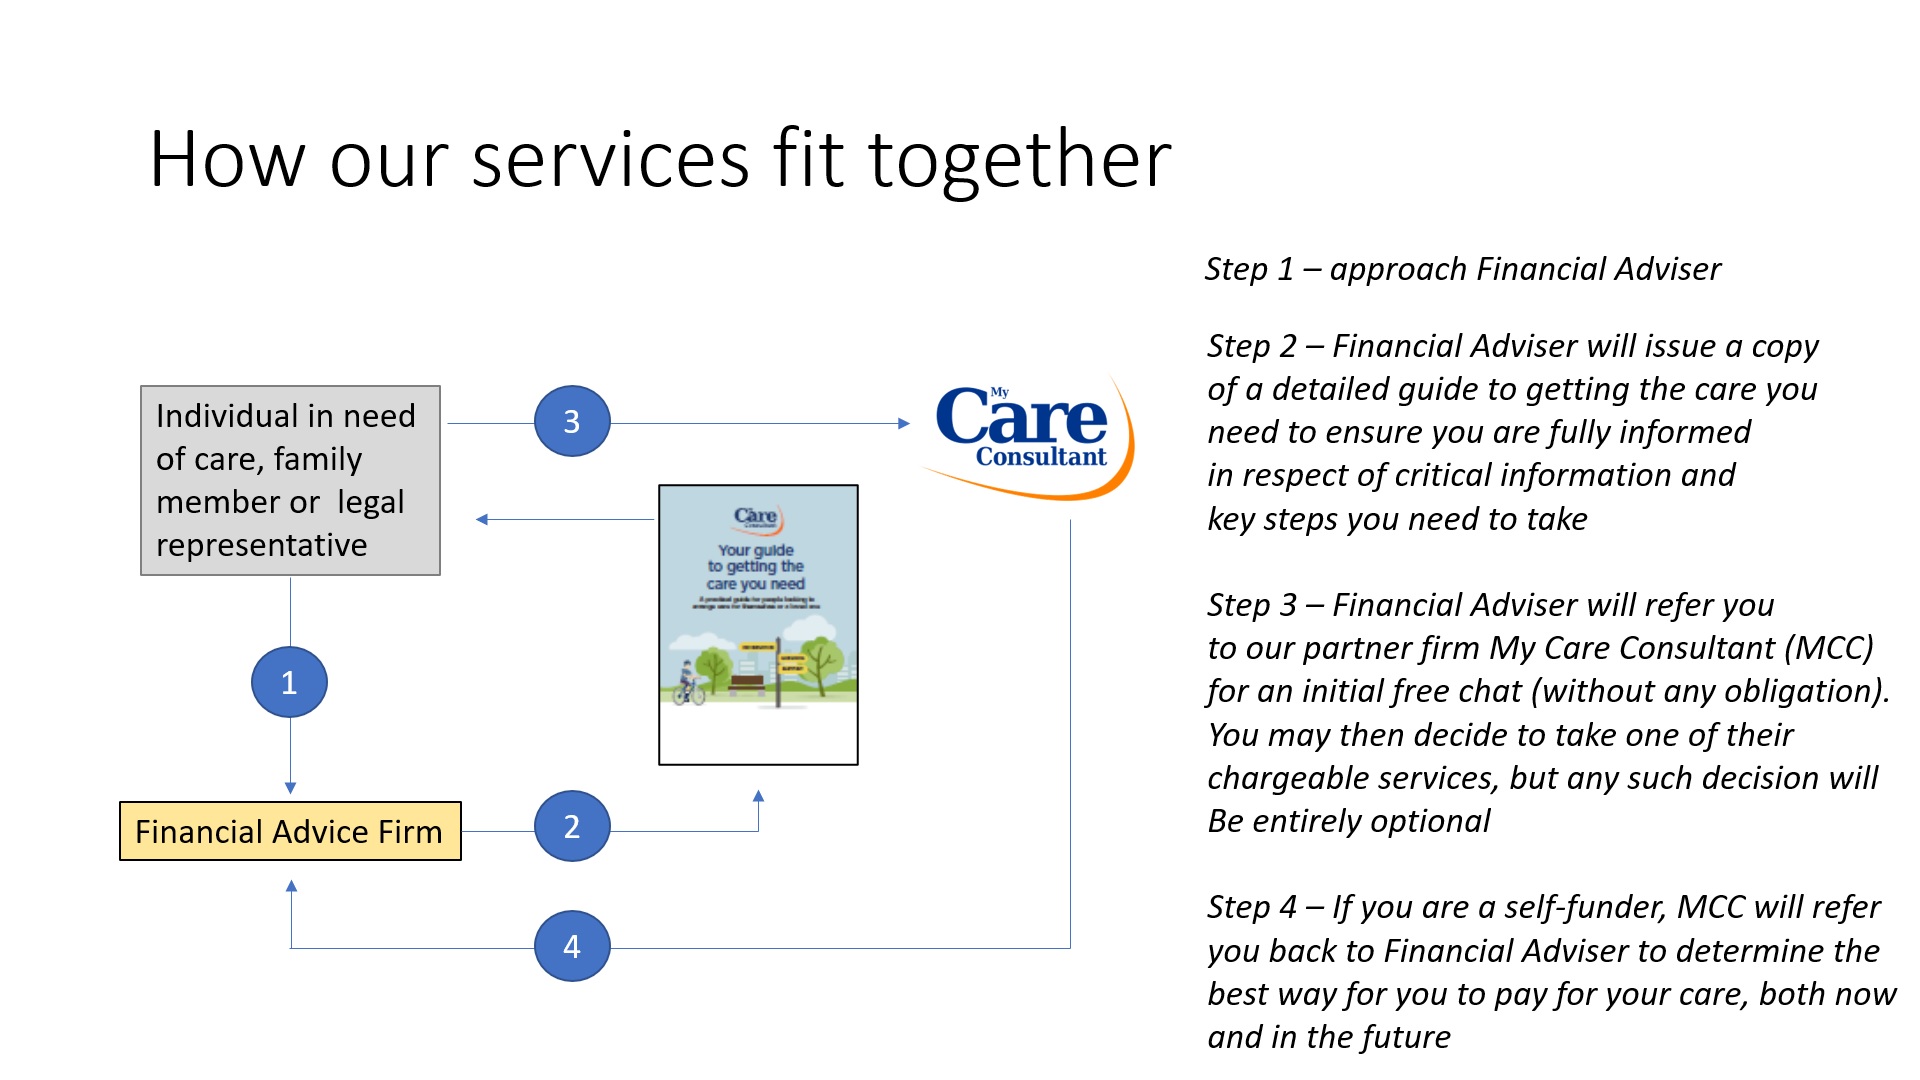 Power Point presentation - Our Complete Care Advice Service